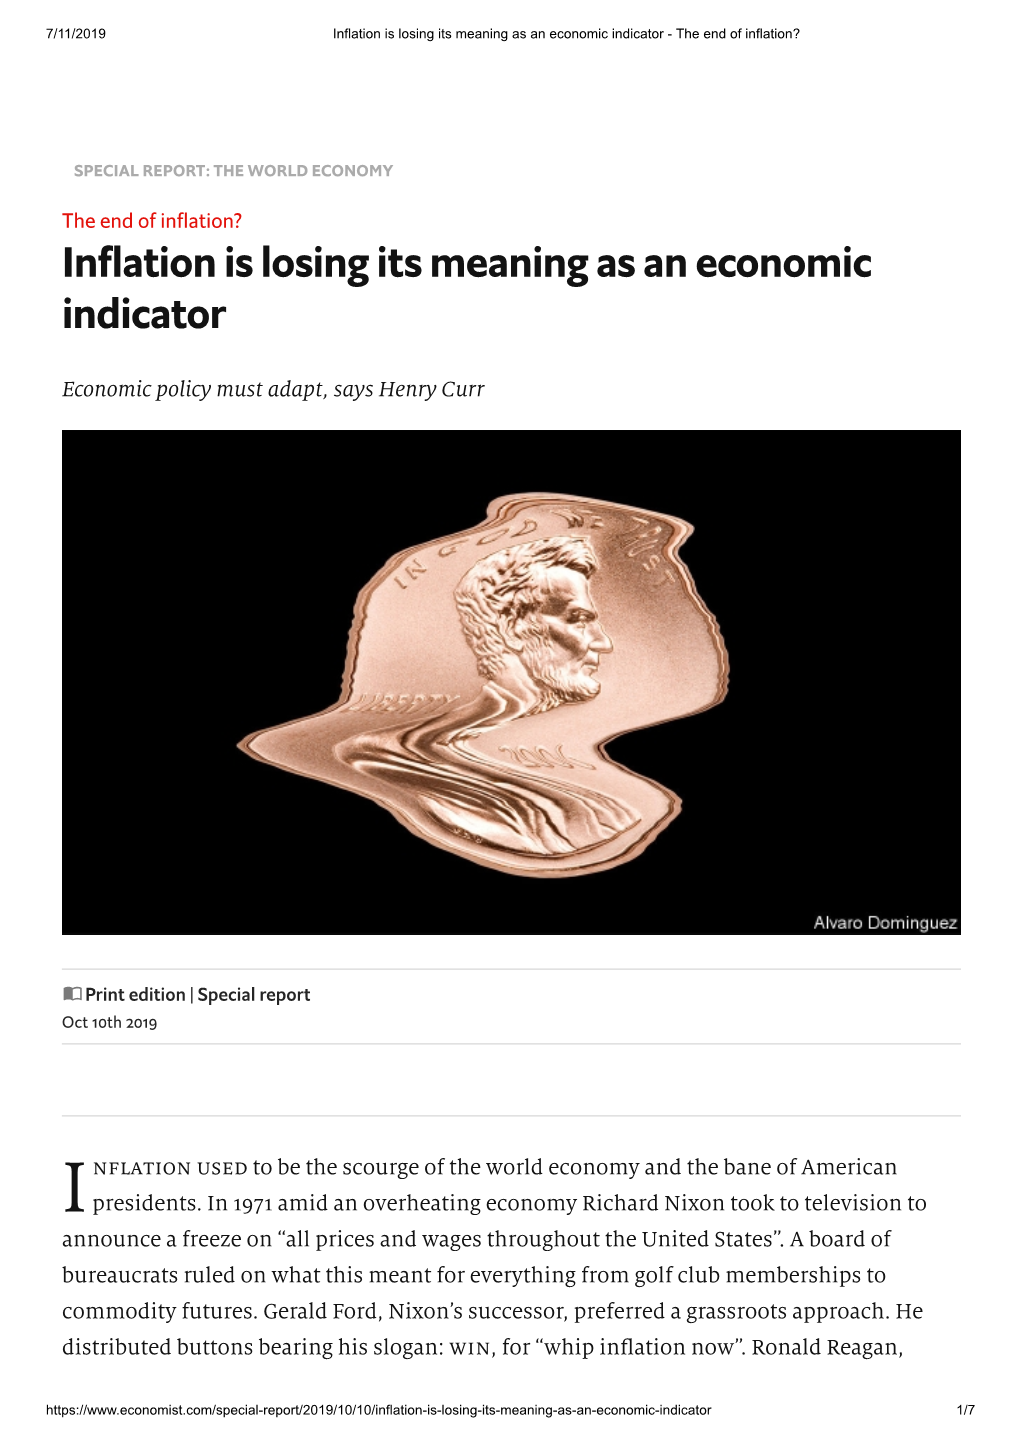 Inflation Is Losing Its Meaning As an Economic Indicator - the End of Inflation?